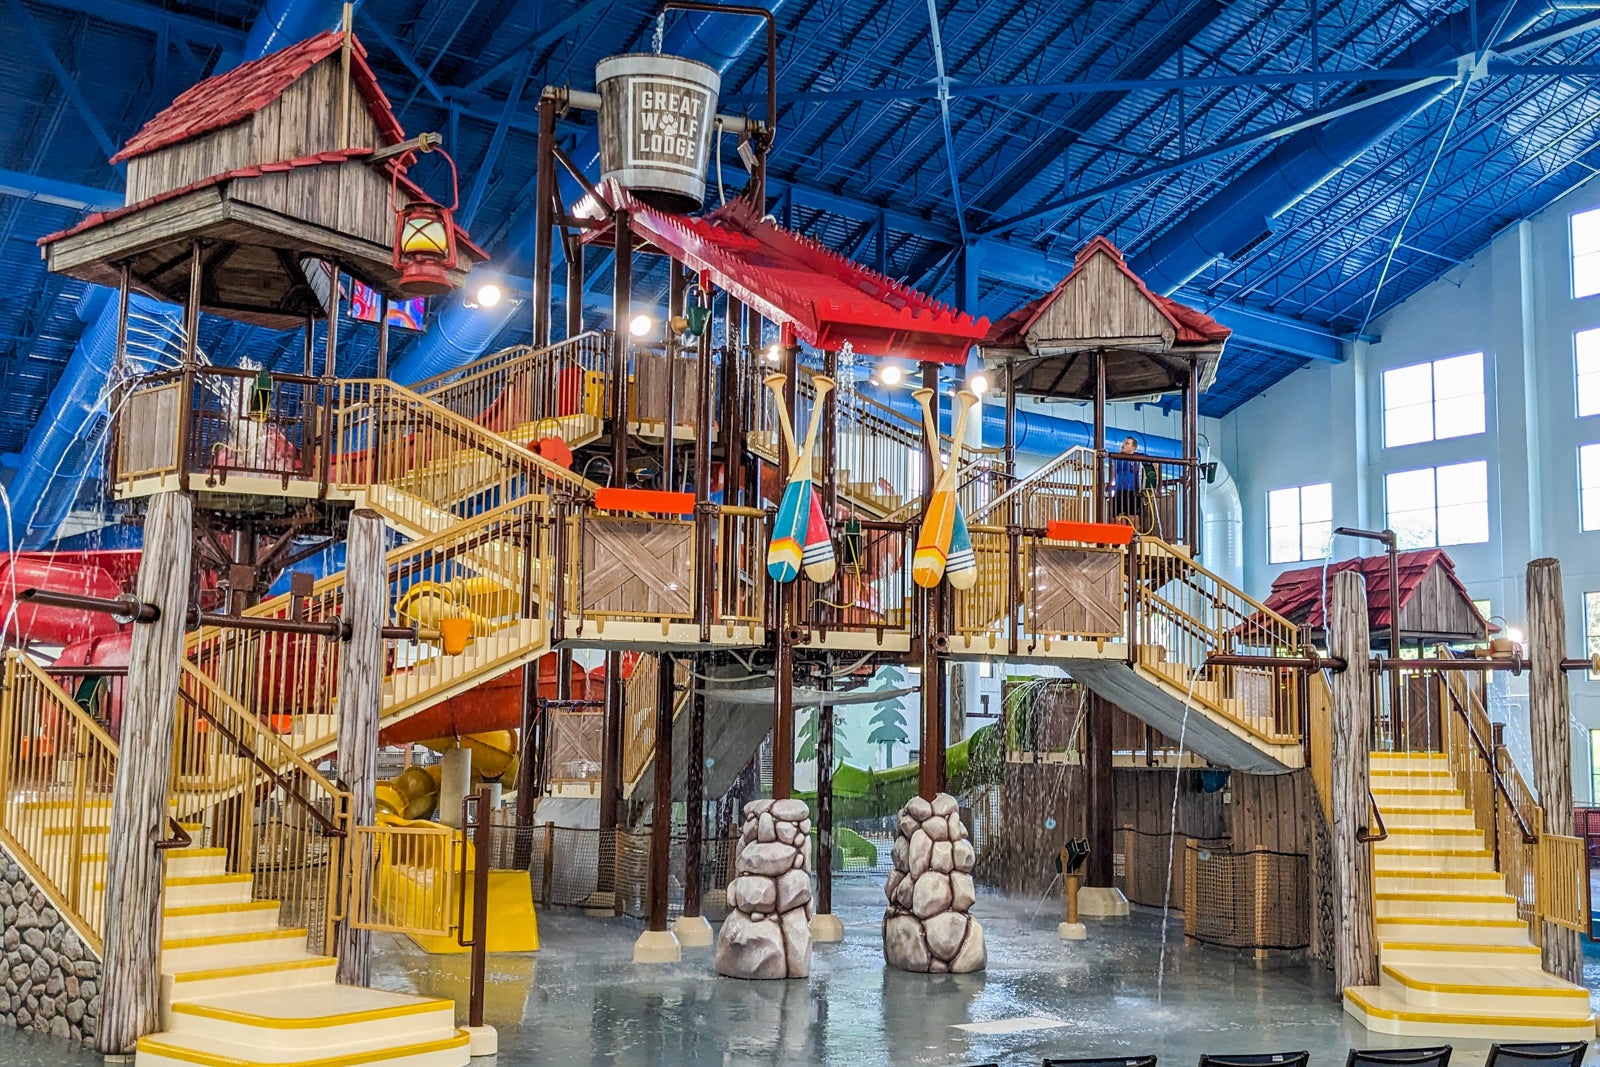 Water play climbing structure with slides at Great Wolf Lodge Maryland